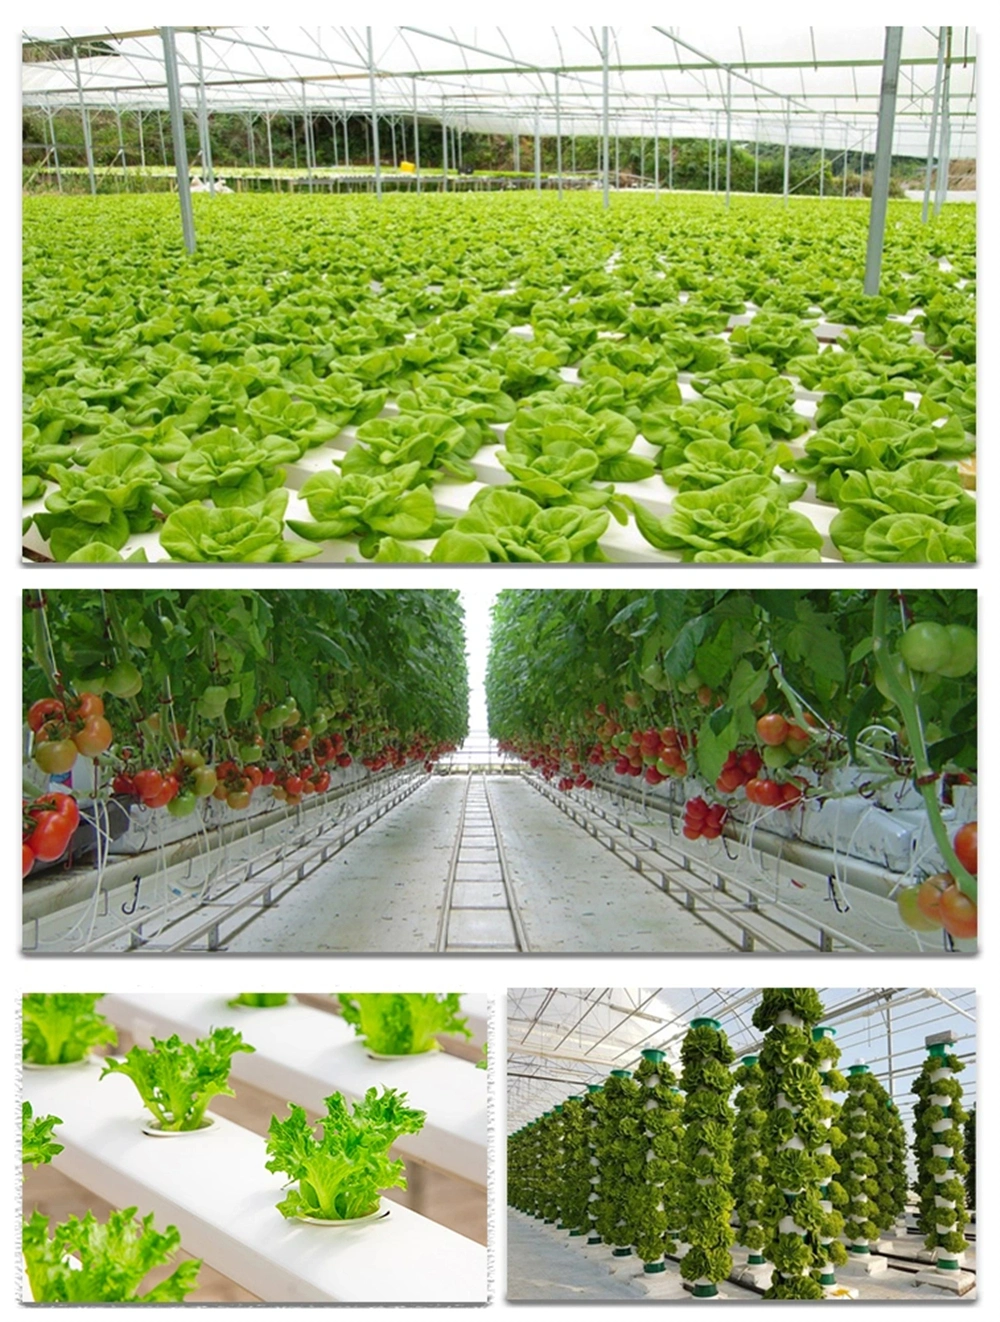 High Tunnel/Multi-Span Film Greenhouse for Tomato/Cucumber with Hydroponics System Planting/Farming/Growing